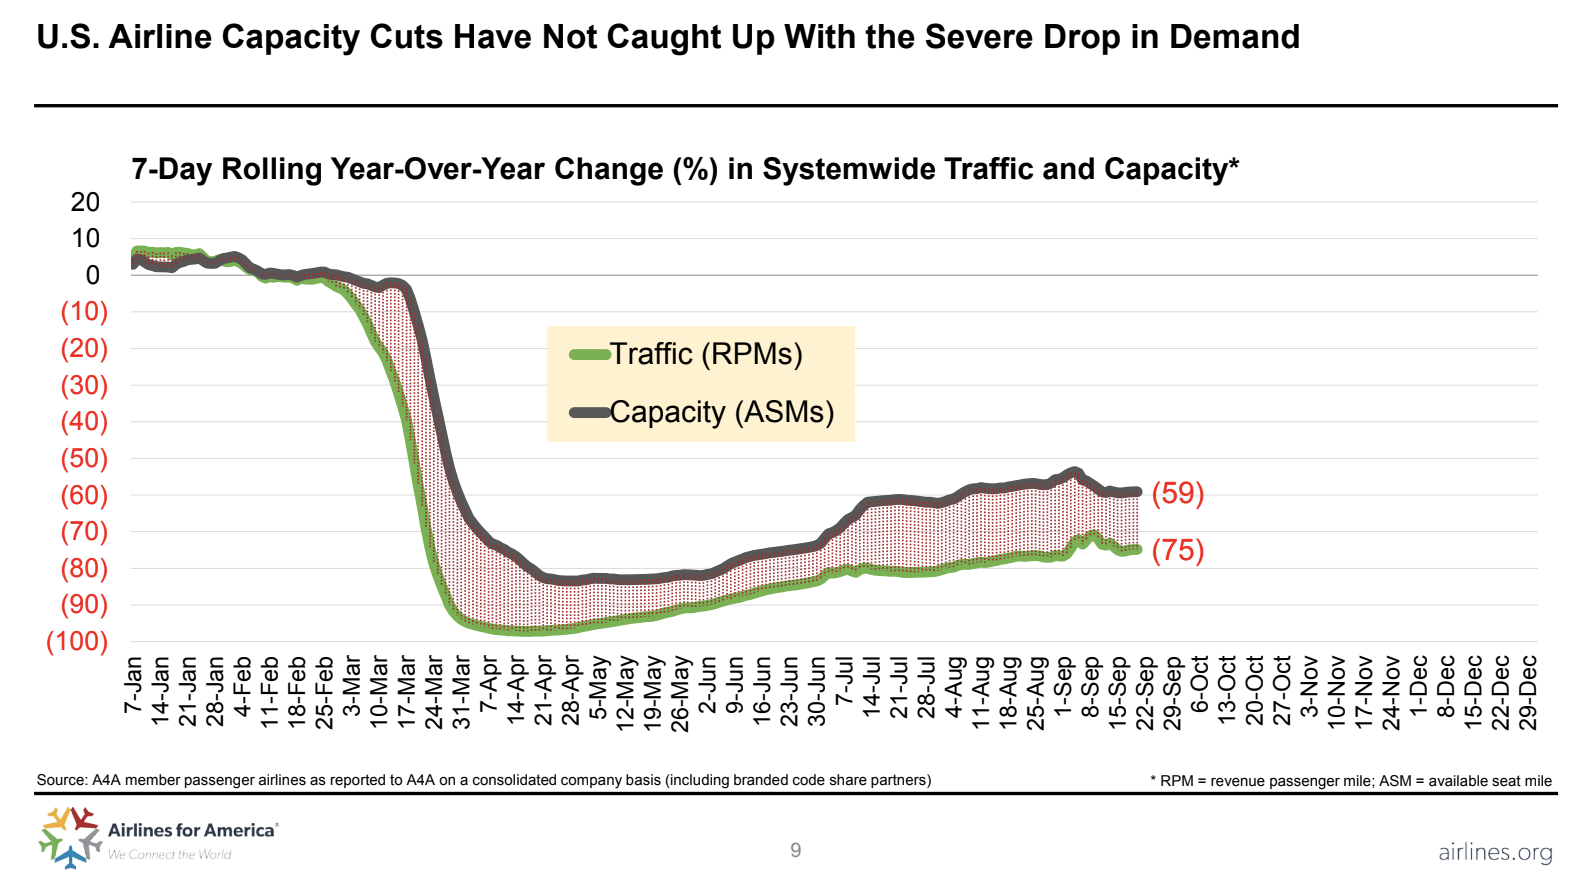 US airline capacity cuts and traffic decreases from 7-January-2020 to late September-2020 